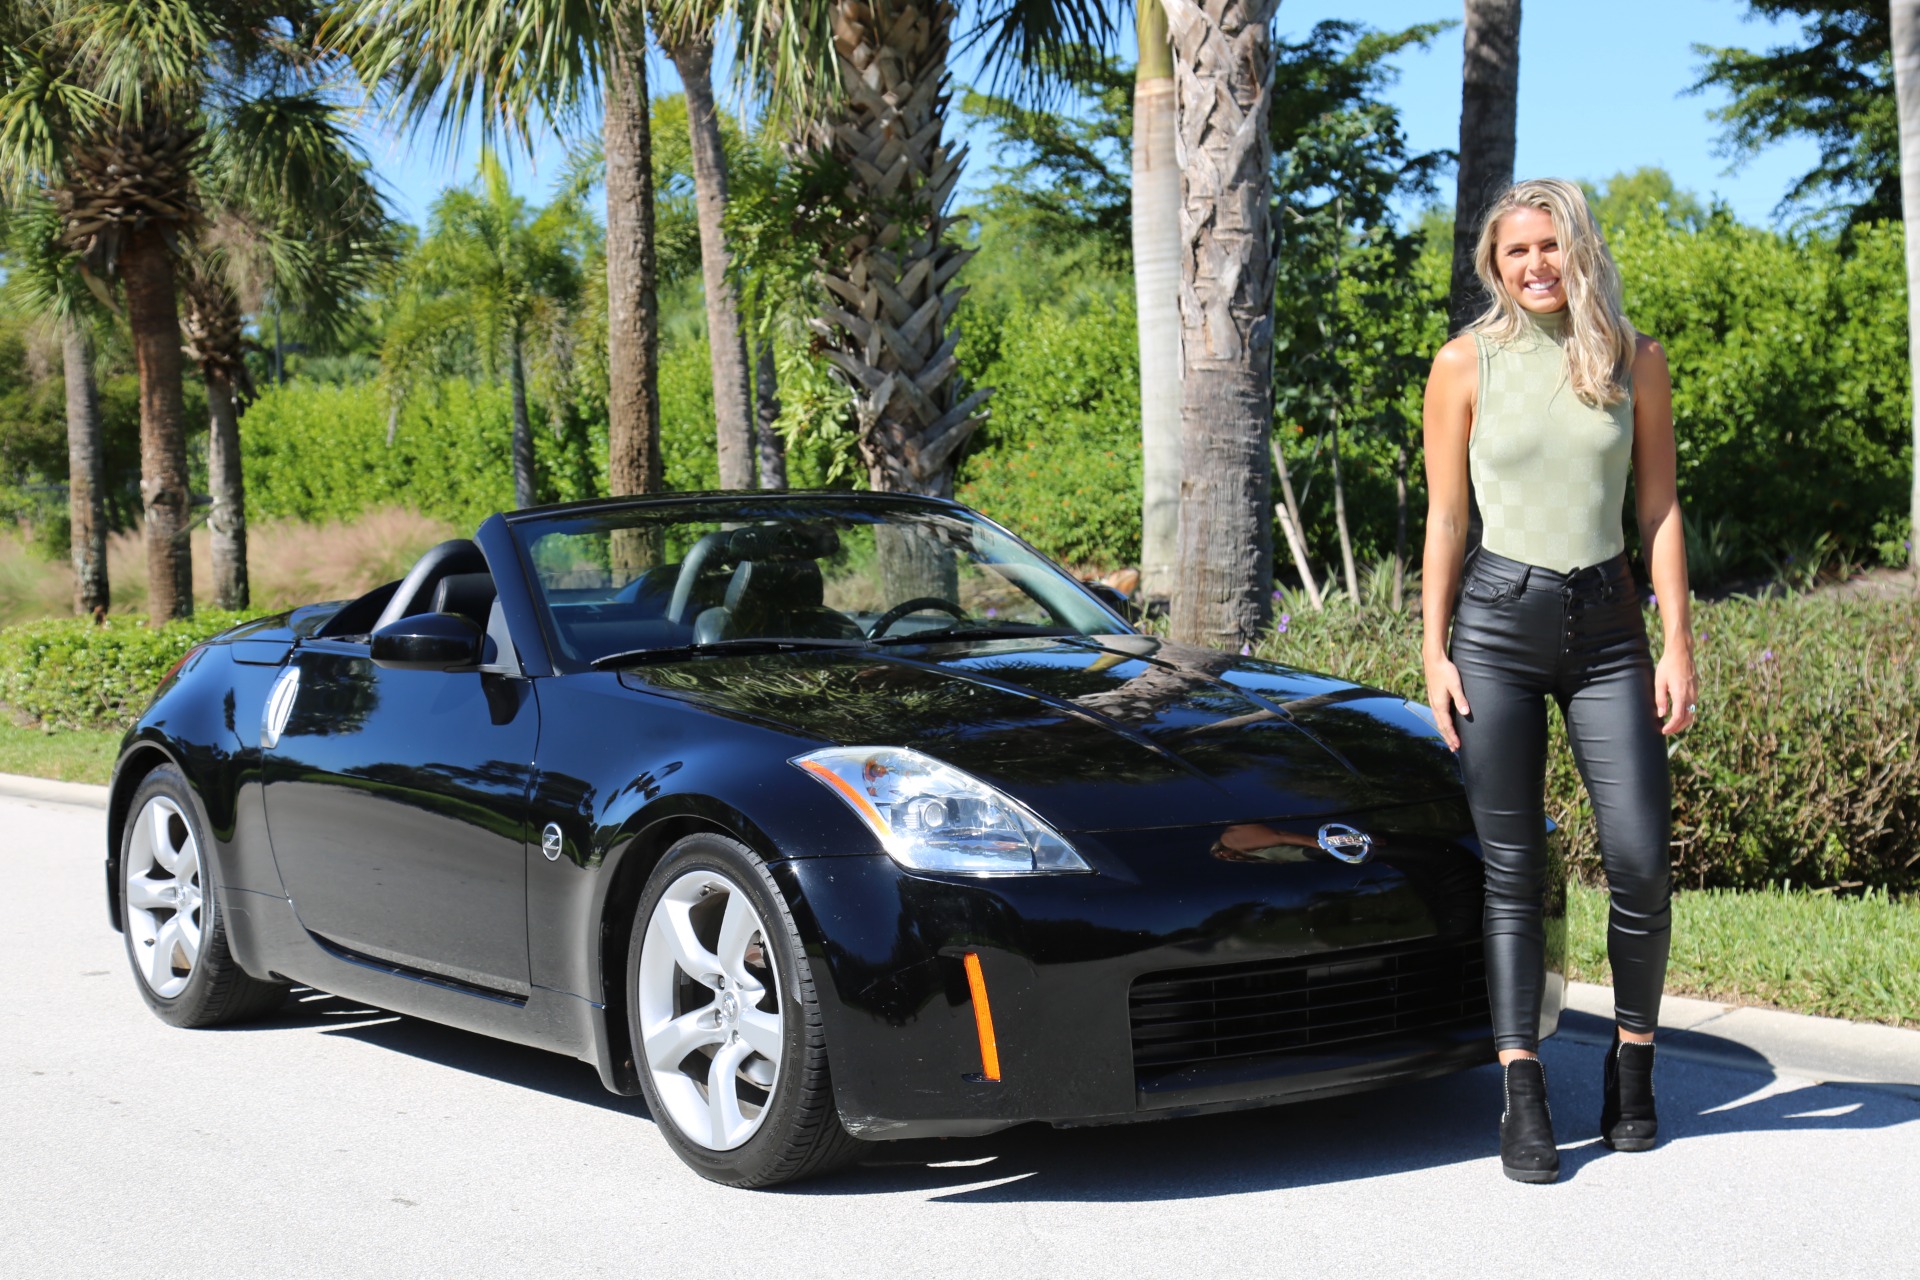 Used 2004 Nissan 350Z Convertible for sale Sold at Muscle Cars for Sale Inc. in Fort Myers FL 33912 1